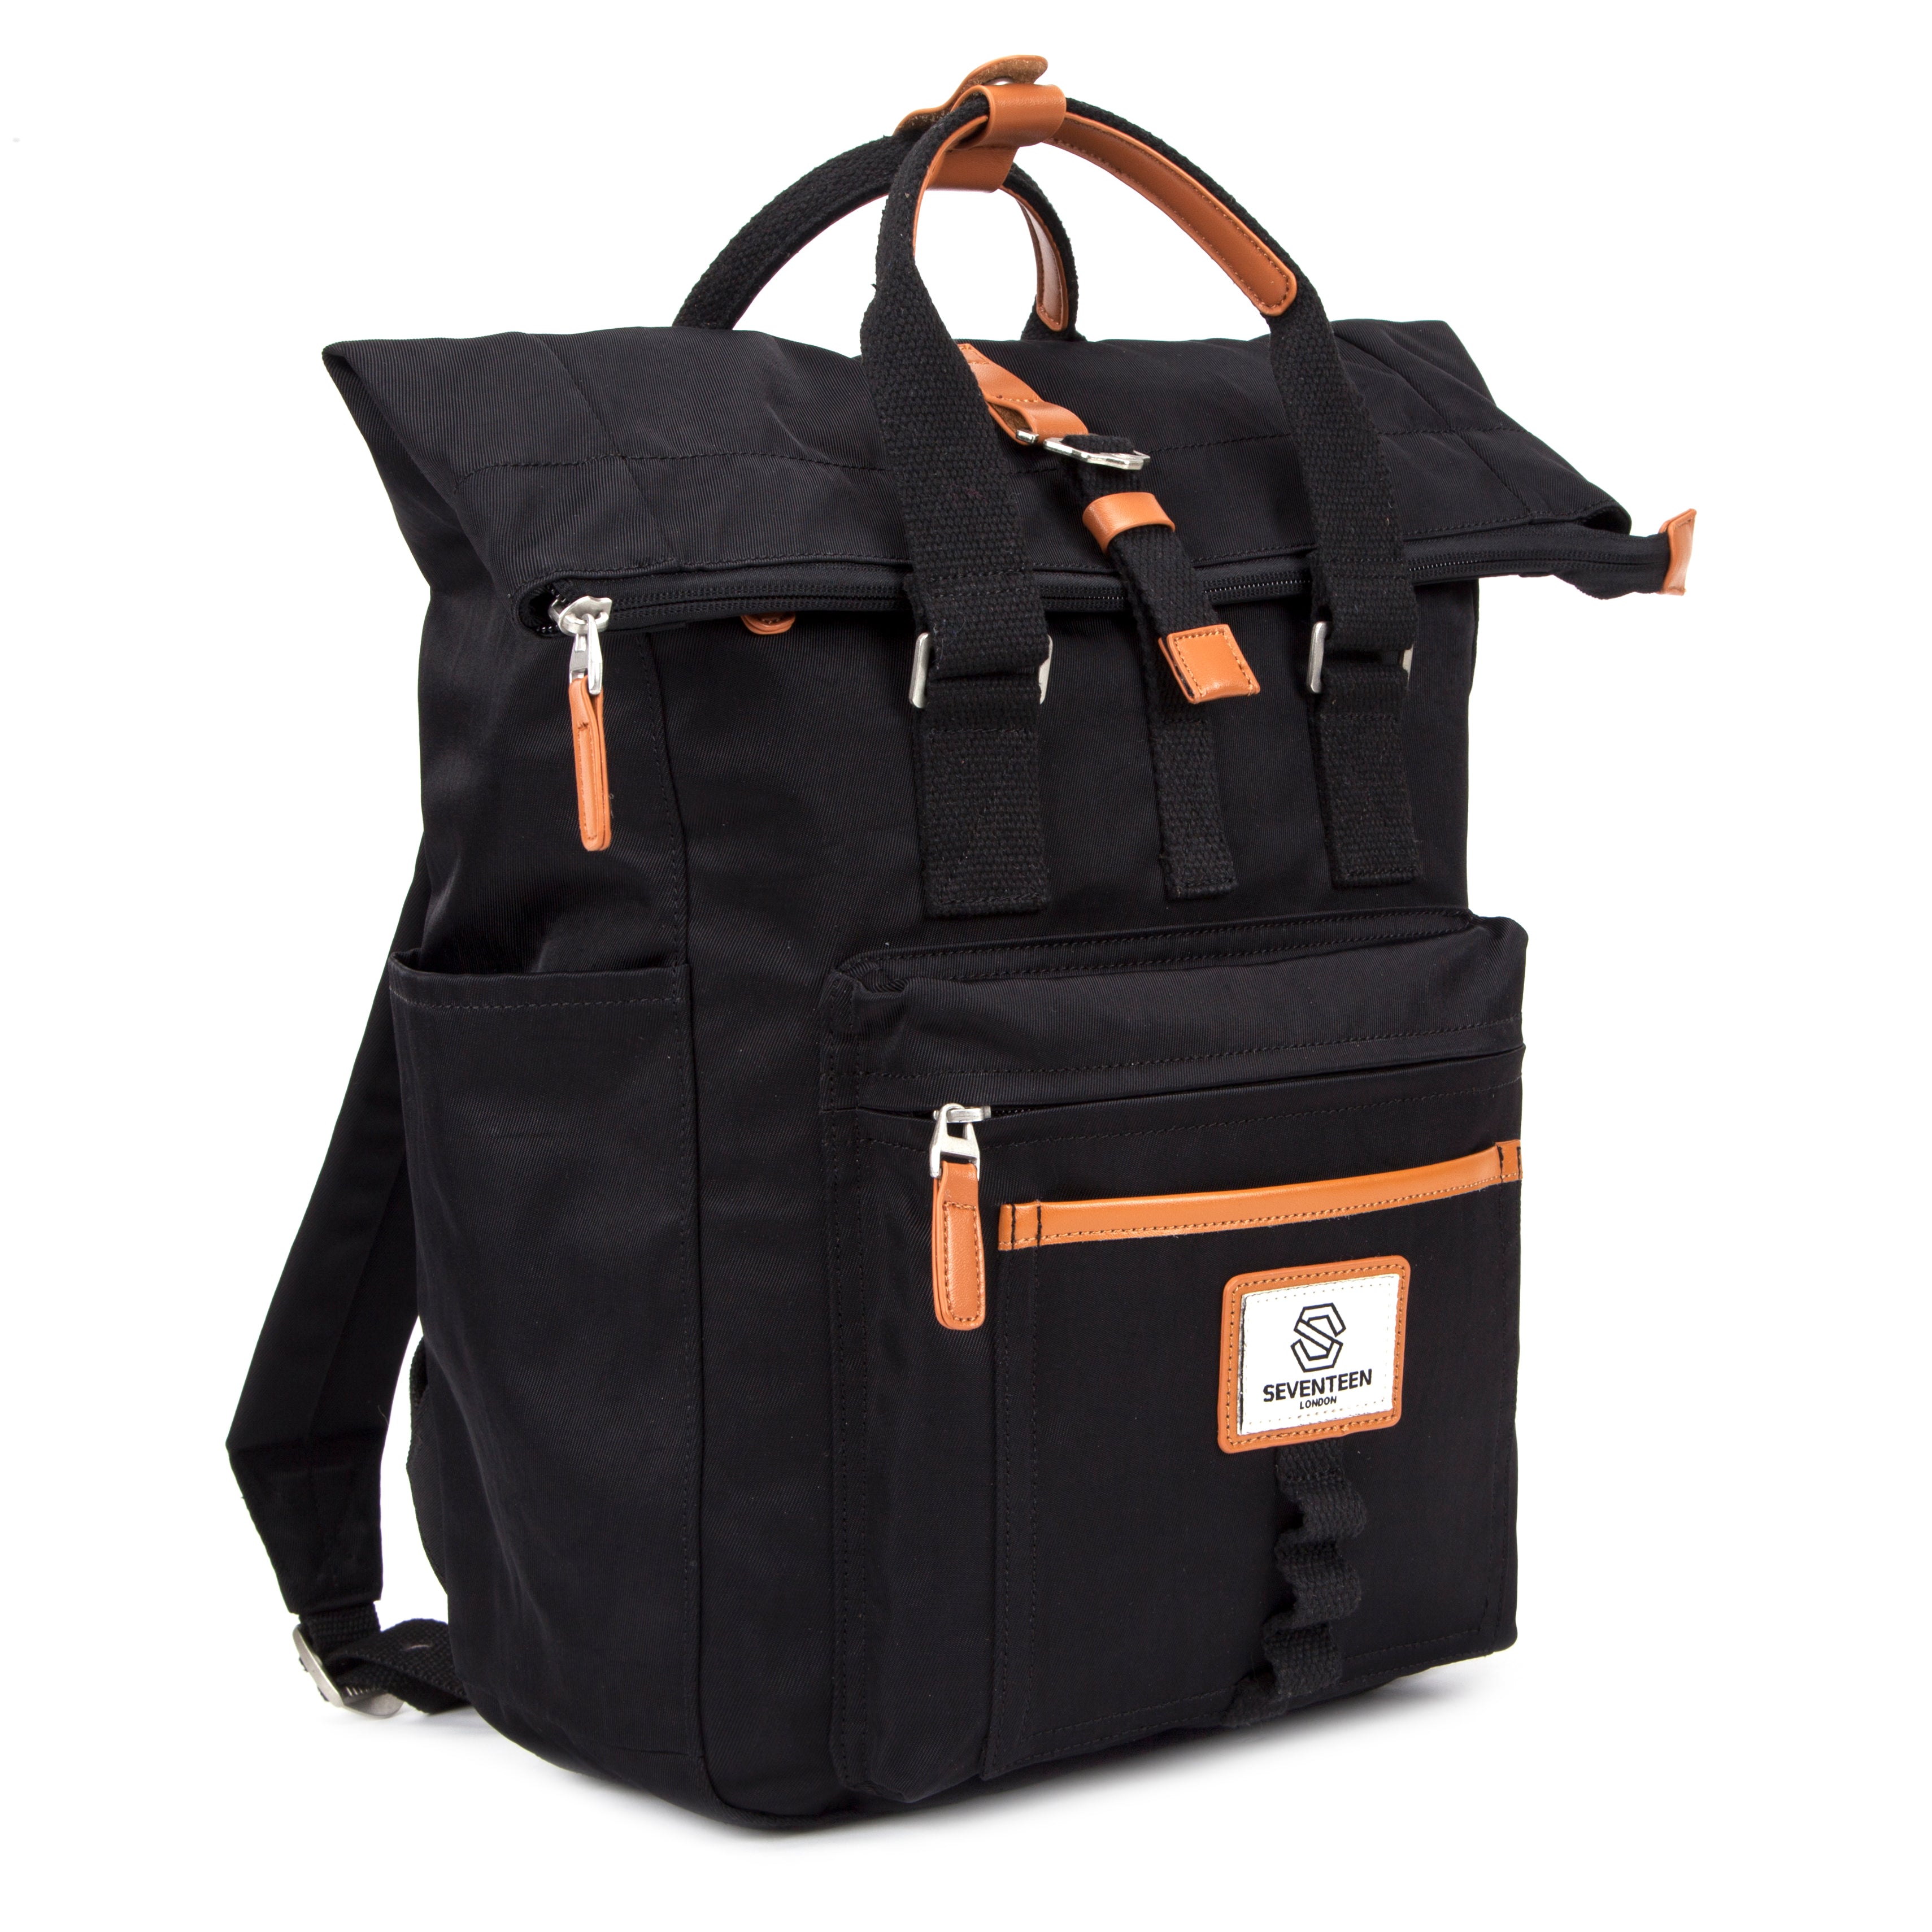 Canary Wharf Backpack - Black with Tan - Seventeen London